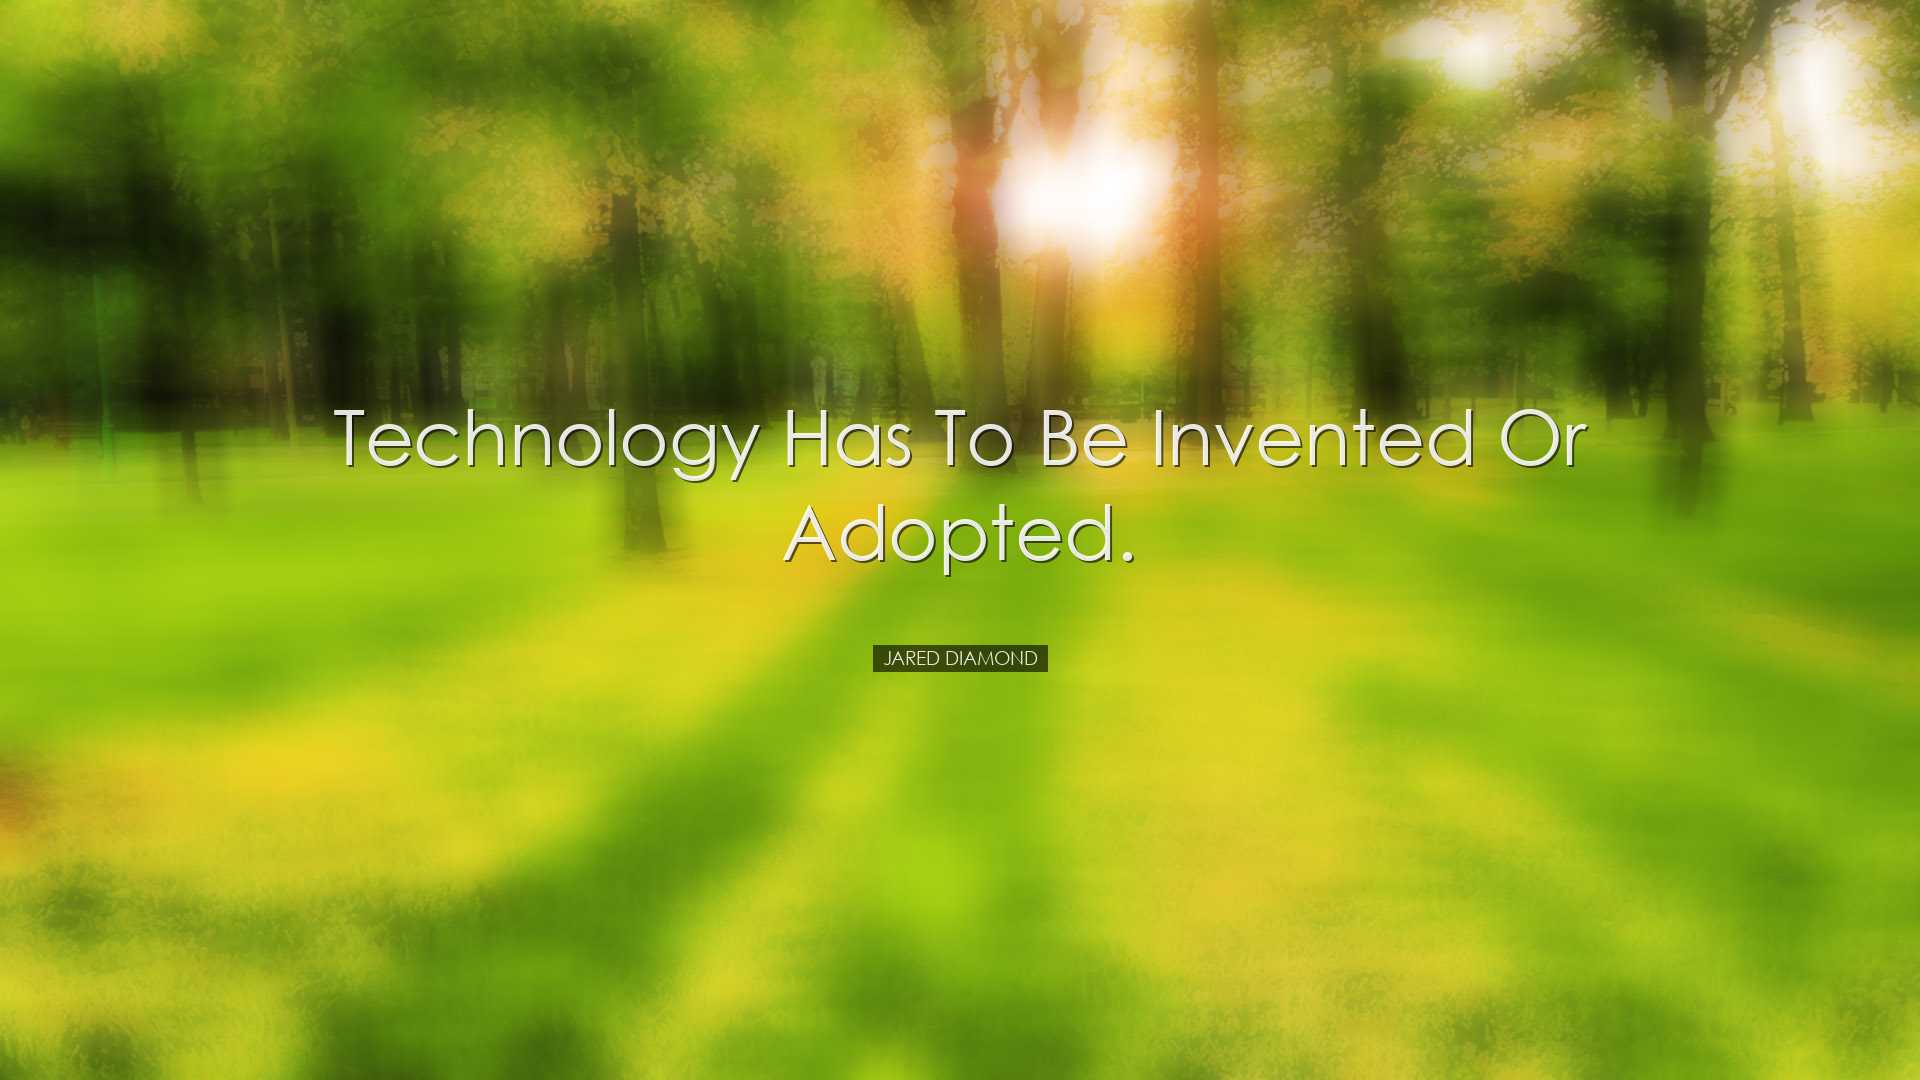 Technology has to be invented or adopted. - Jared Diamond